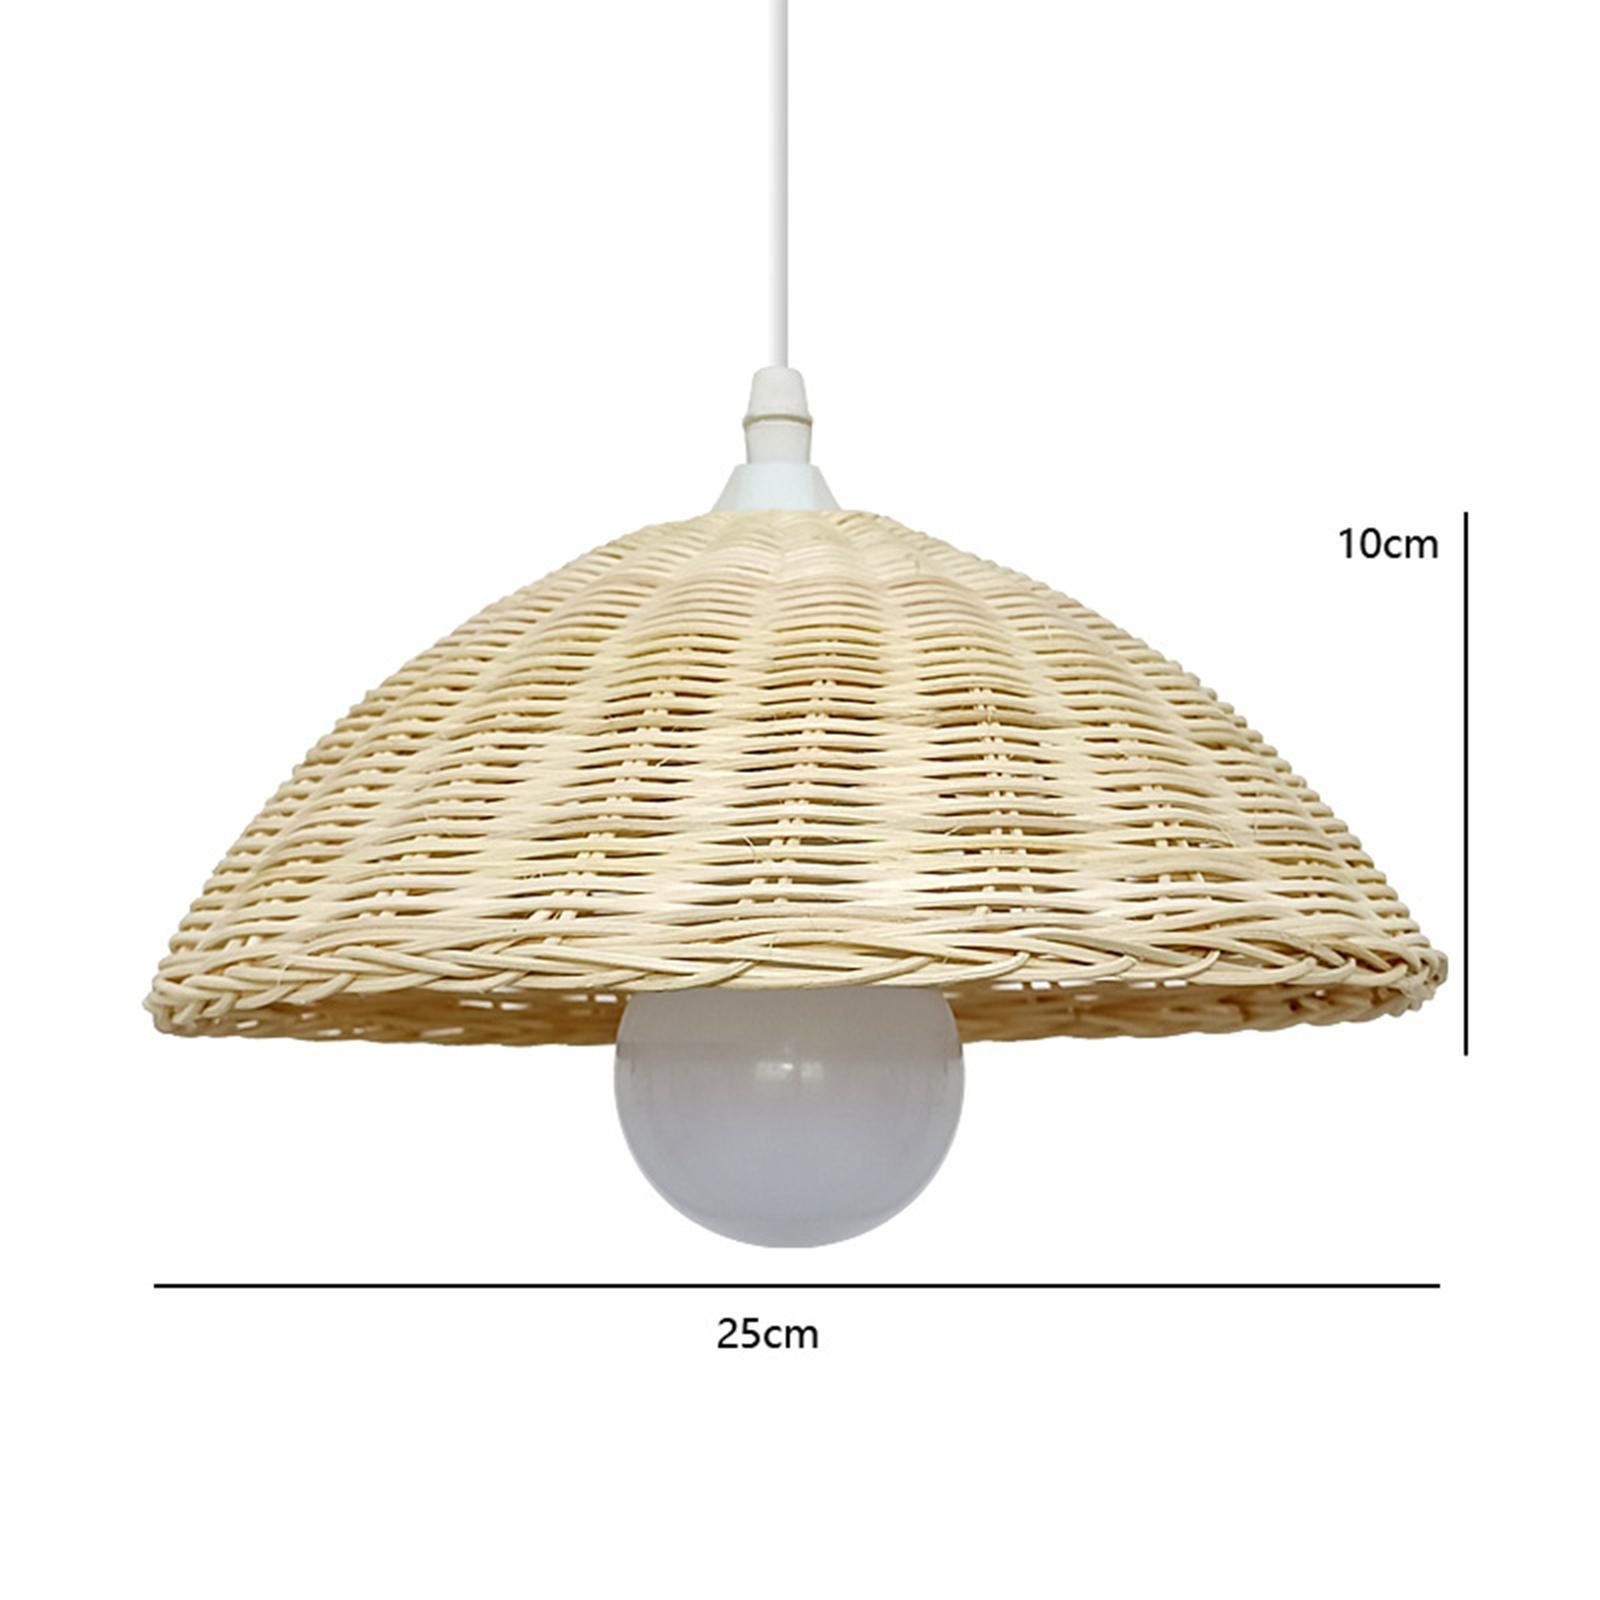 Bamboo Lamp Shade Decoration Light Bulb Cover Bulb Guard for Dining Room